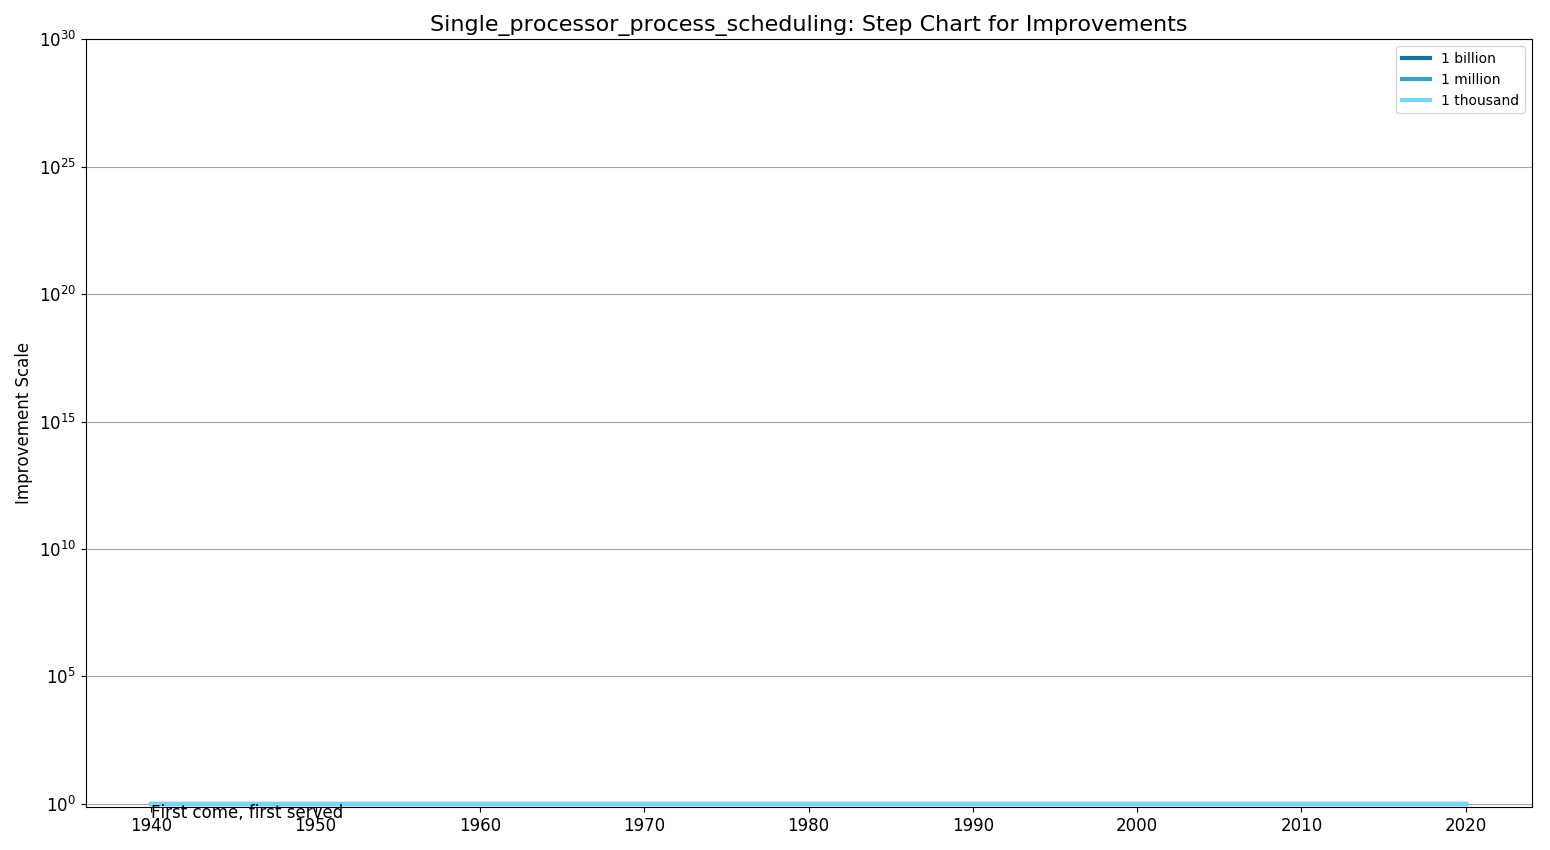 Single processor process schedulingStepChart.png